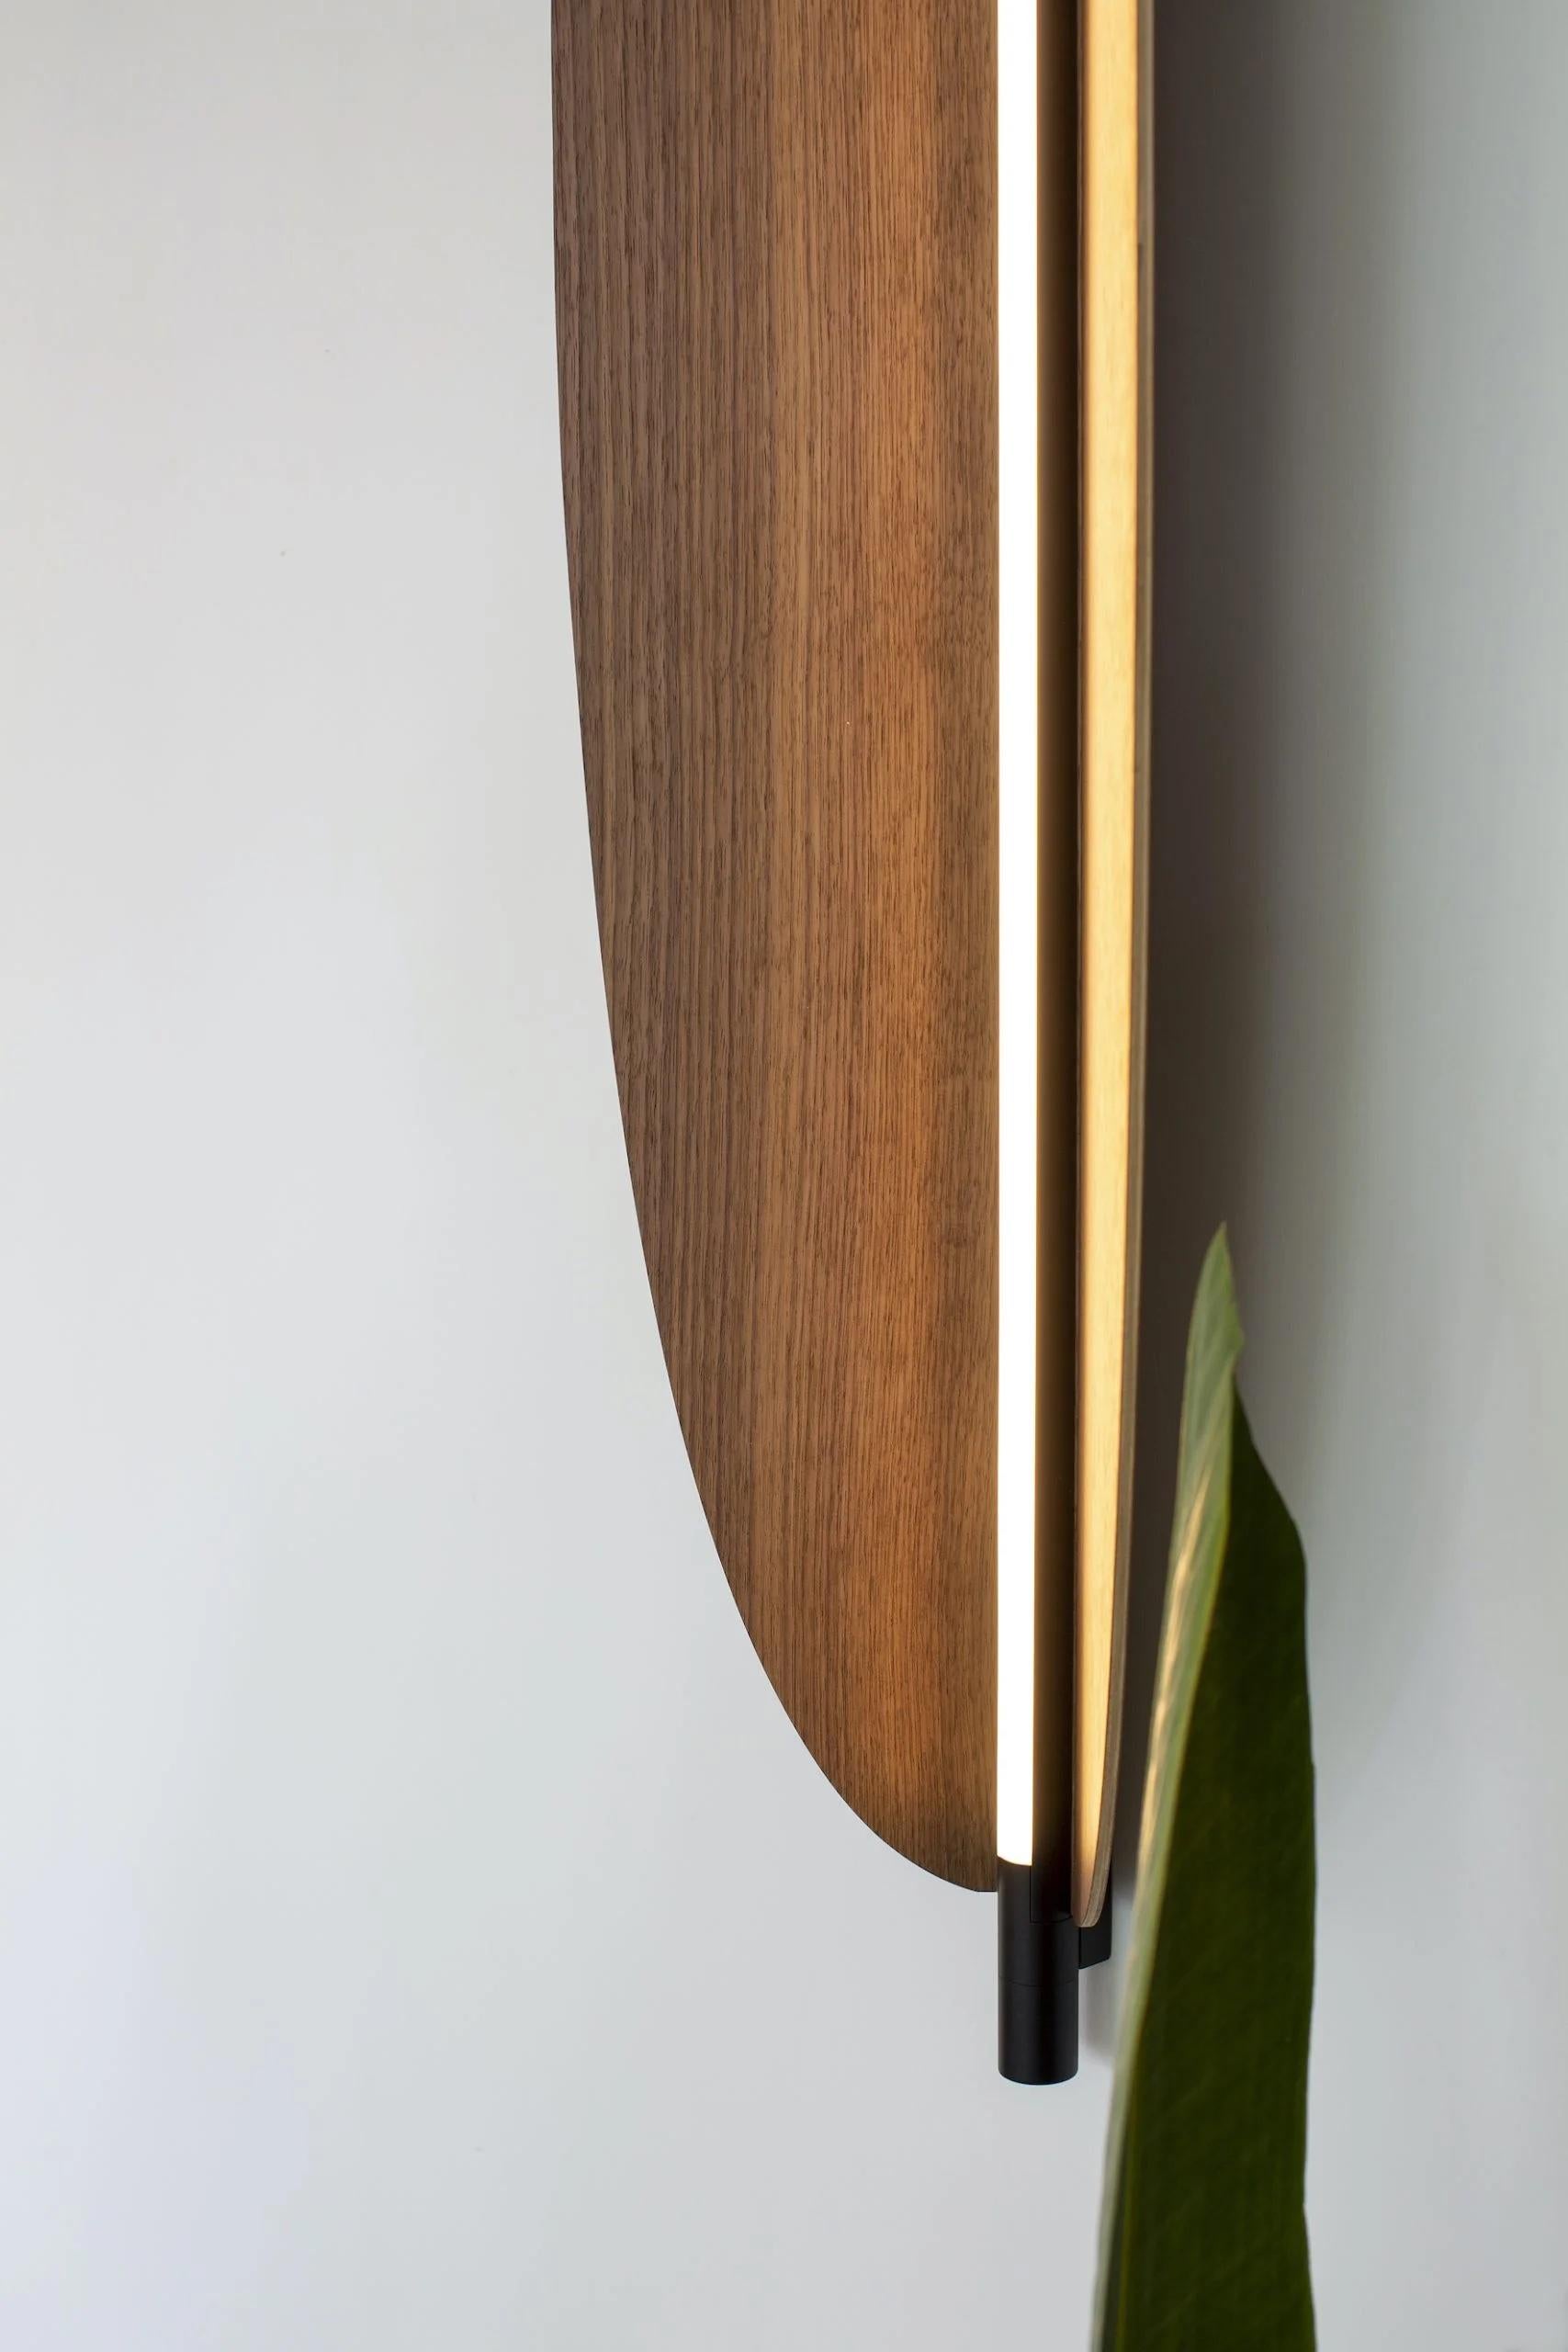 Organic Modern Contemporary Wall Lamp 'Thula 562.43' by Federica Biasi x Tooy, Black + Walnut For Sale